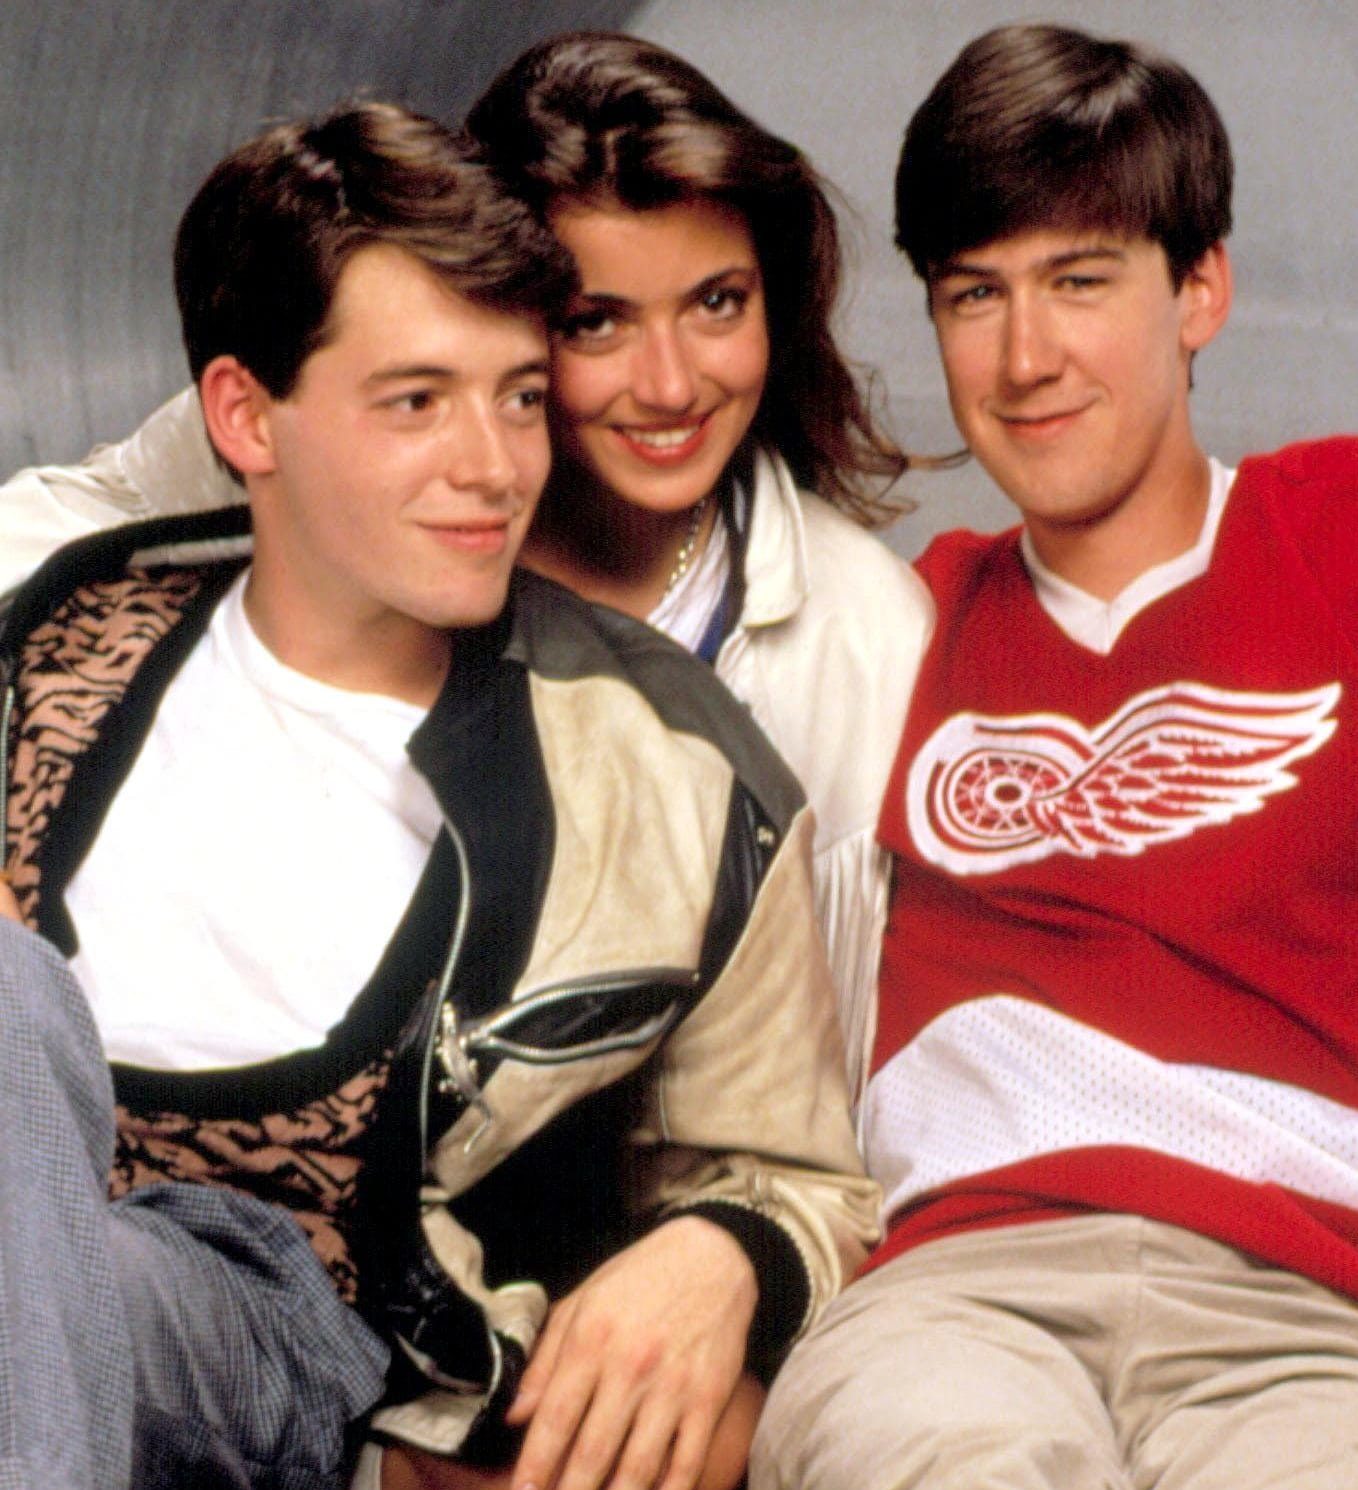 Right from the beginning of the movie, Ferris frames his latest adventure a...